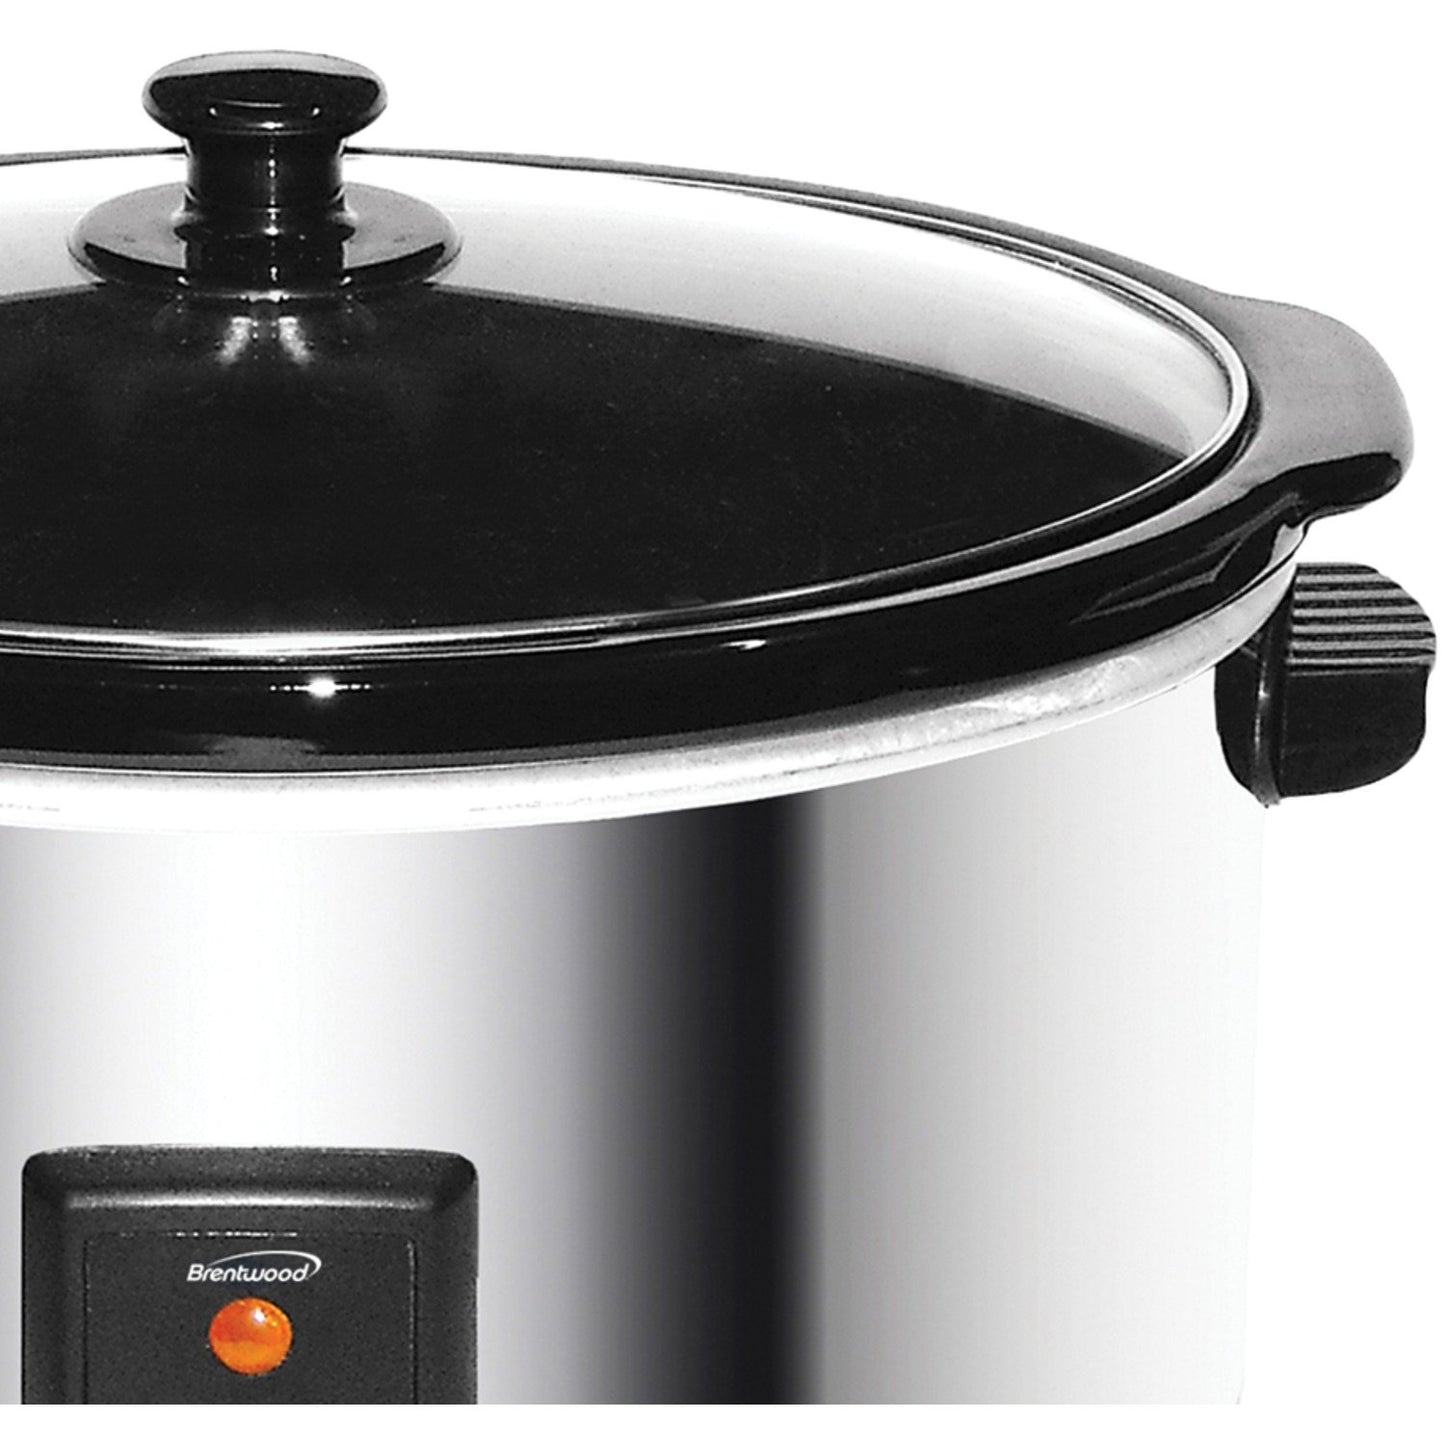 Brentwood Appl. SC-170S 8Q Stainless Steel Slow Cooker